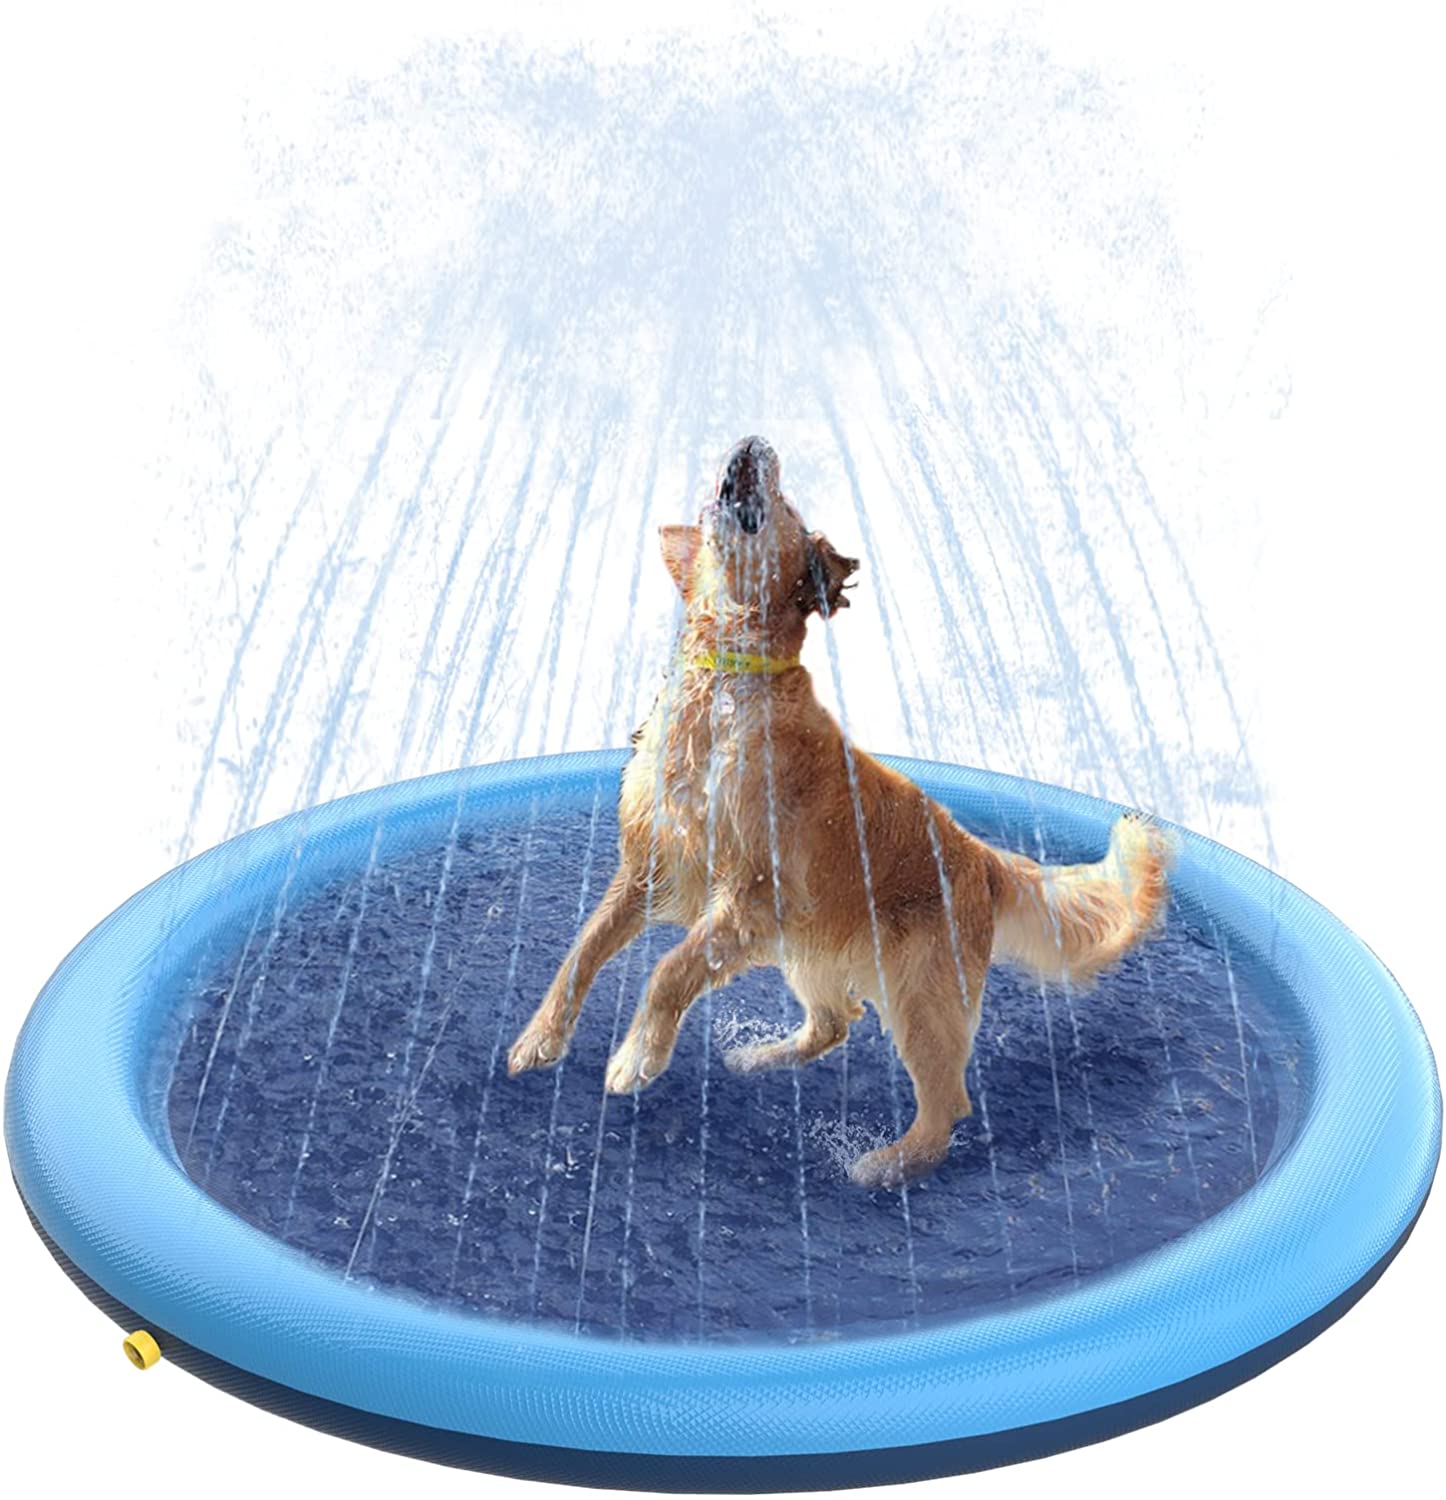 Double-Ring Thickened Splash Water Mat for Dogs, Summer Fun Water Toys for  Dogs, 1 Pack